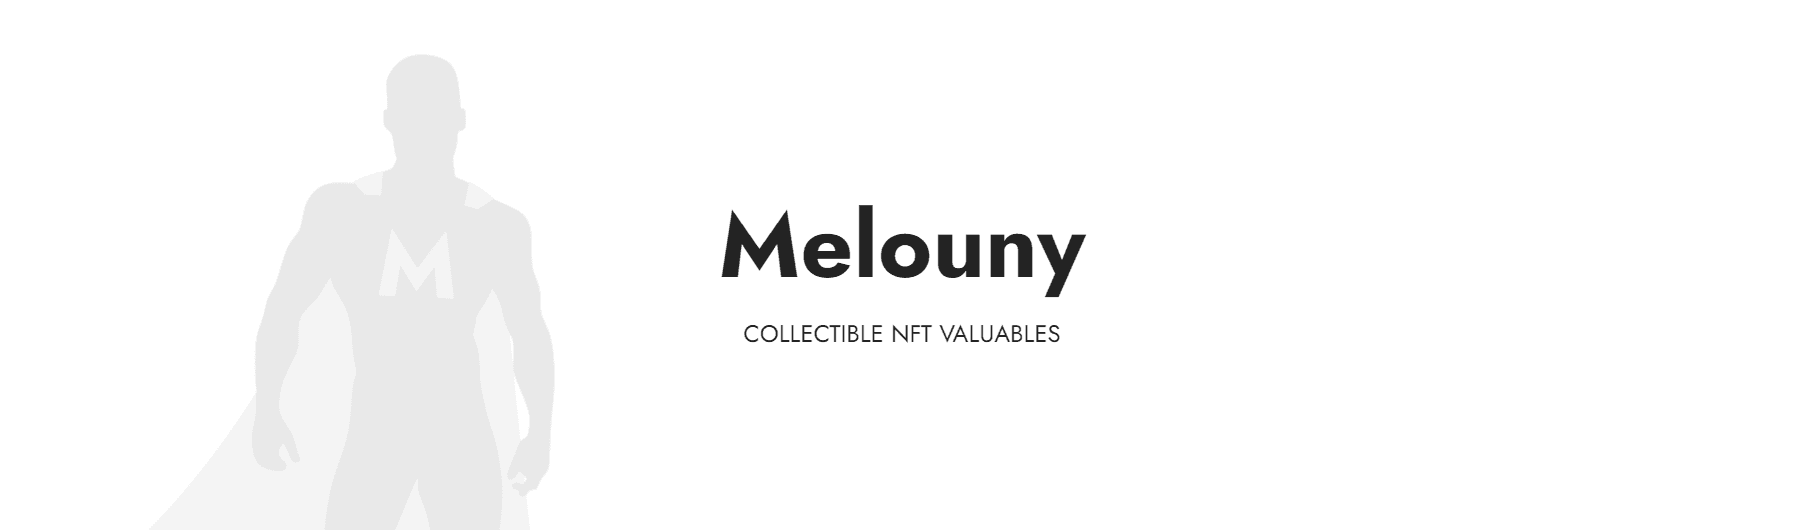 Melouny banner